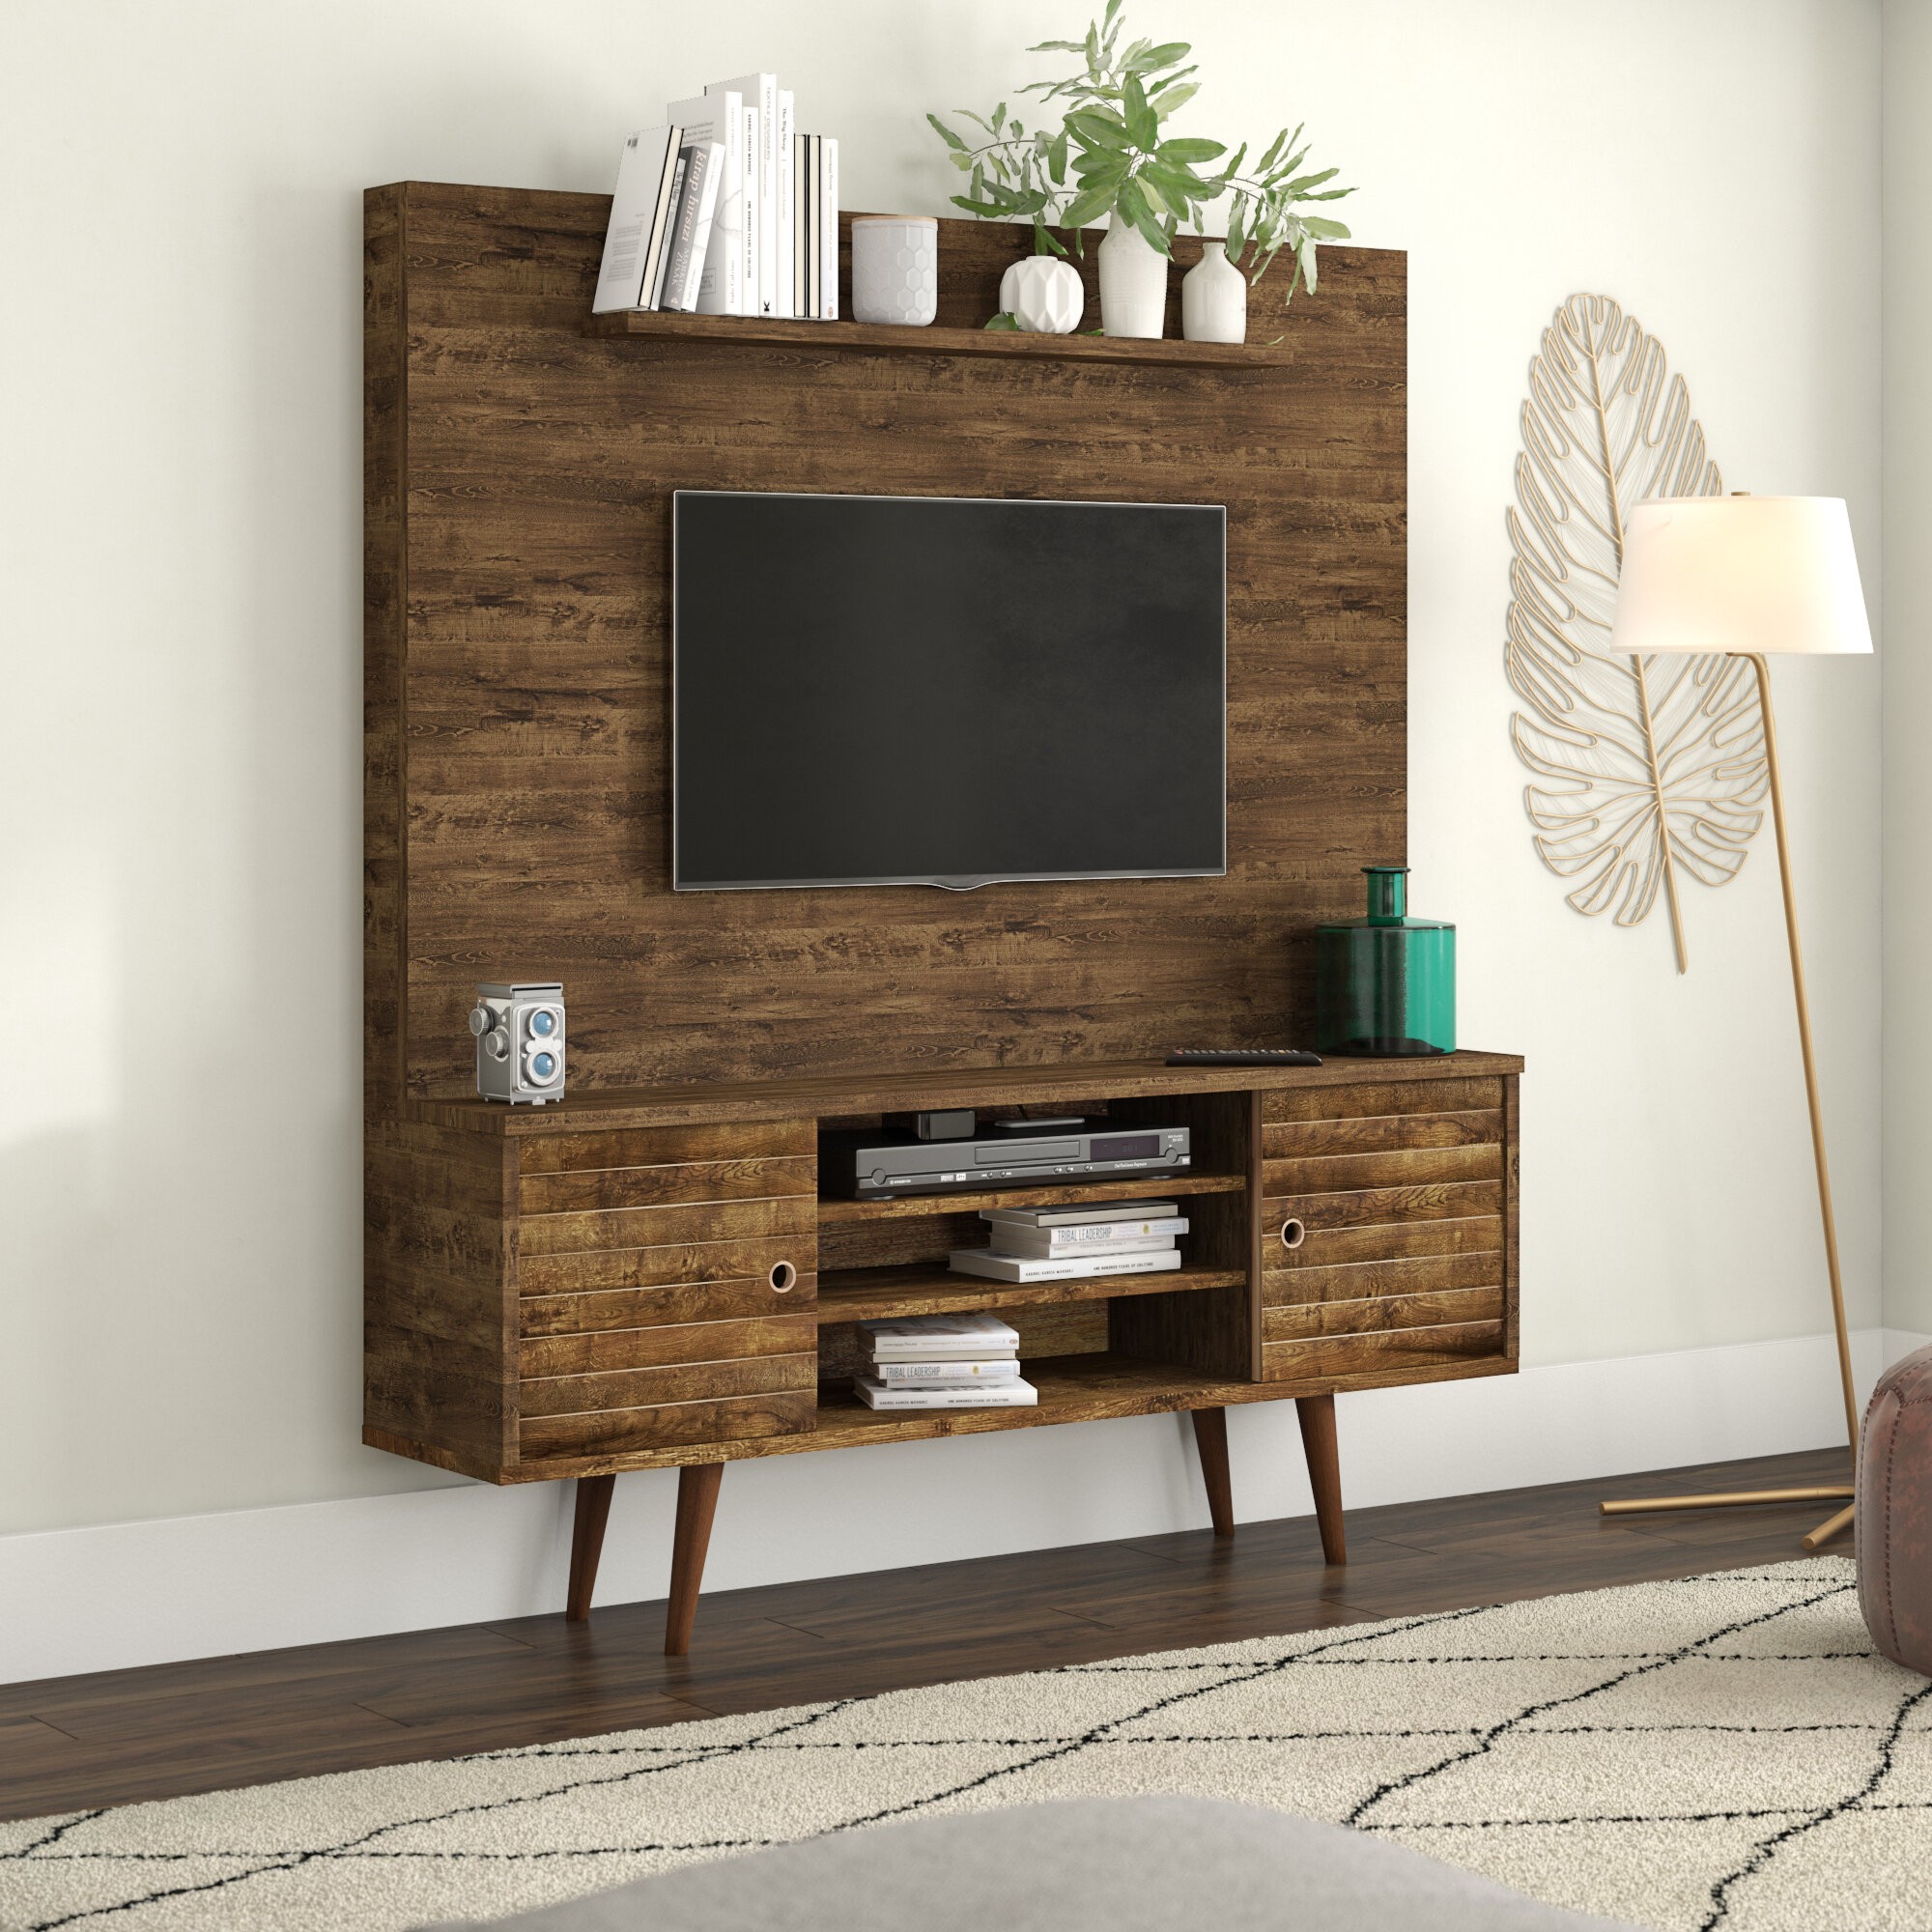 Pinette TV Stand for TVs up to 28 inches